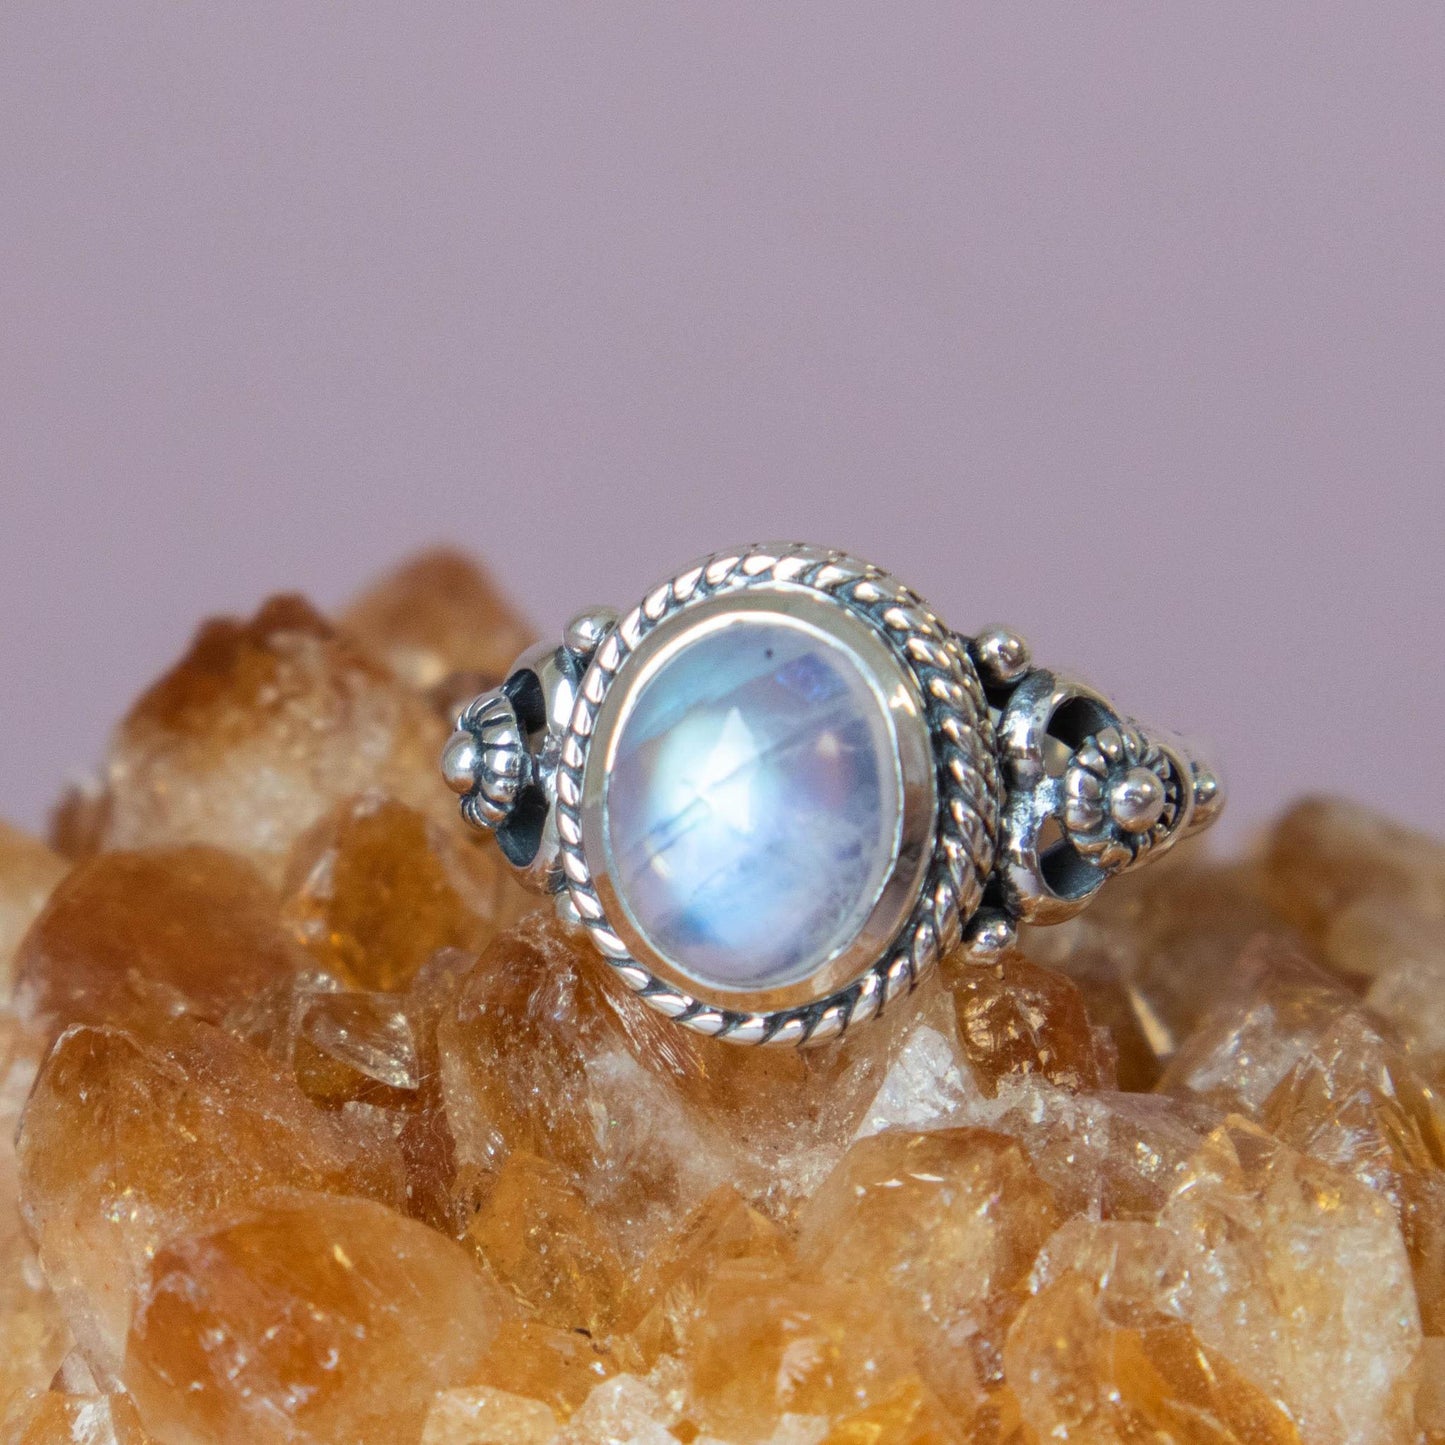 rainbow moonstone, rainbow moonstone ring, rainbow moonstone jewelry, crystal ring, crystal jewelry, rainbow moonstone sterling silver ring, rainbow moonstone crystal, rainbow moonstone stone, rainbow moonstone properties, rainbow moonstone healing properties, rainbow moonstone metaphysical properties, rainbow moonstone meaning, moonstone, moonstone ring, moonstone jewelry, moonstone crystal, moonstone properties, moonstone healing properties, moonstone meaning